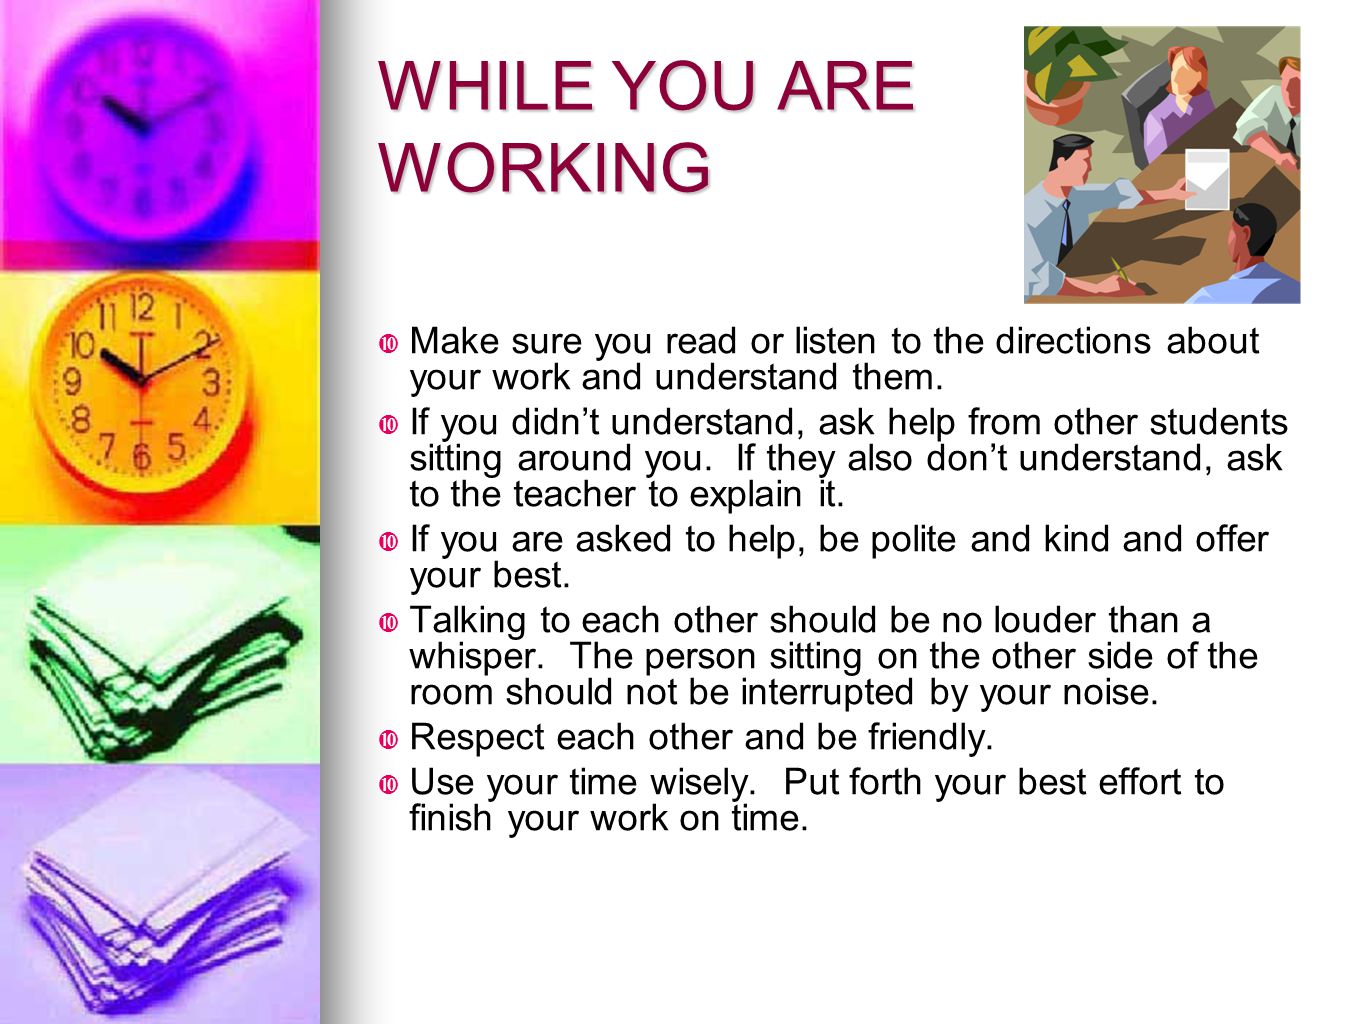 WHILE YOU ARE WORKING Make sure you read or listen to the directions about your work and understand them.